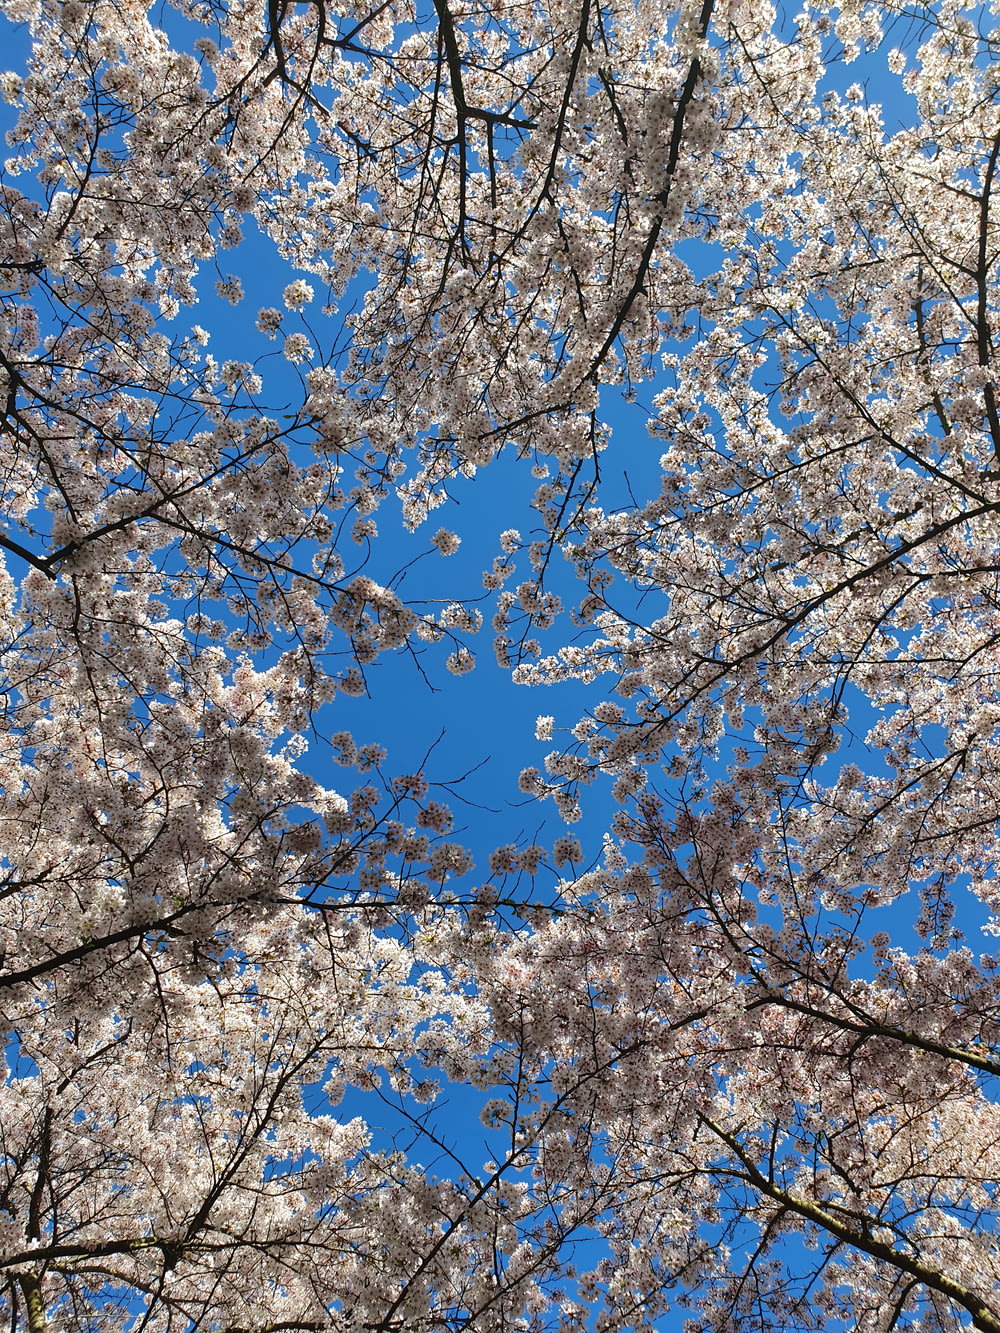 a view of a tree with white flowers and a blue sky in the background